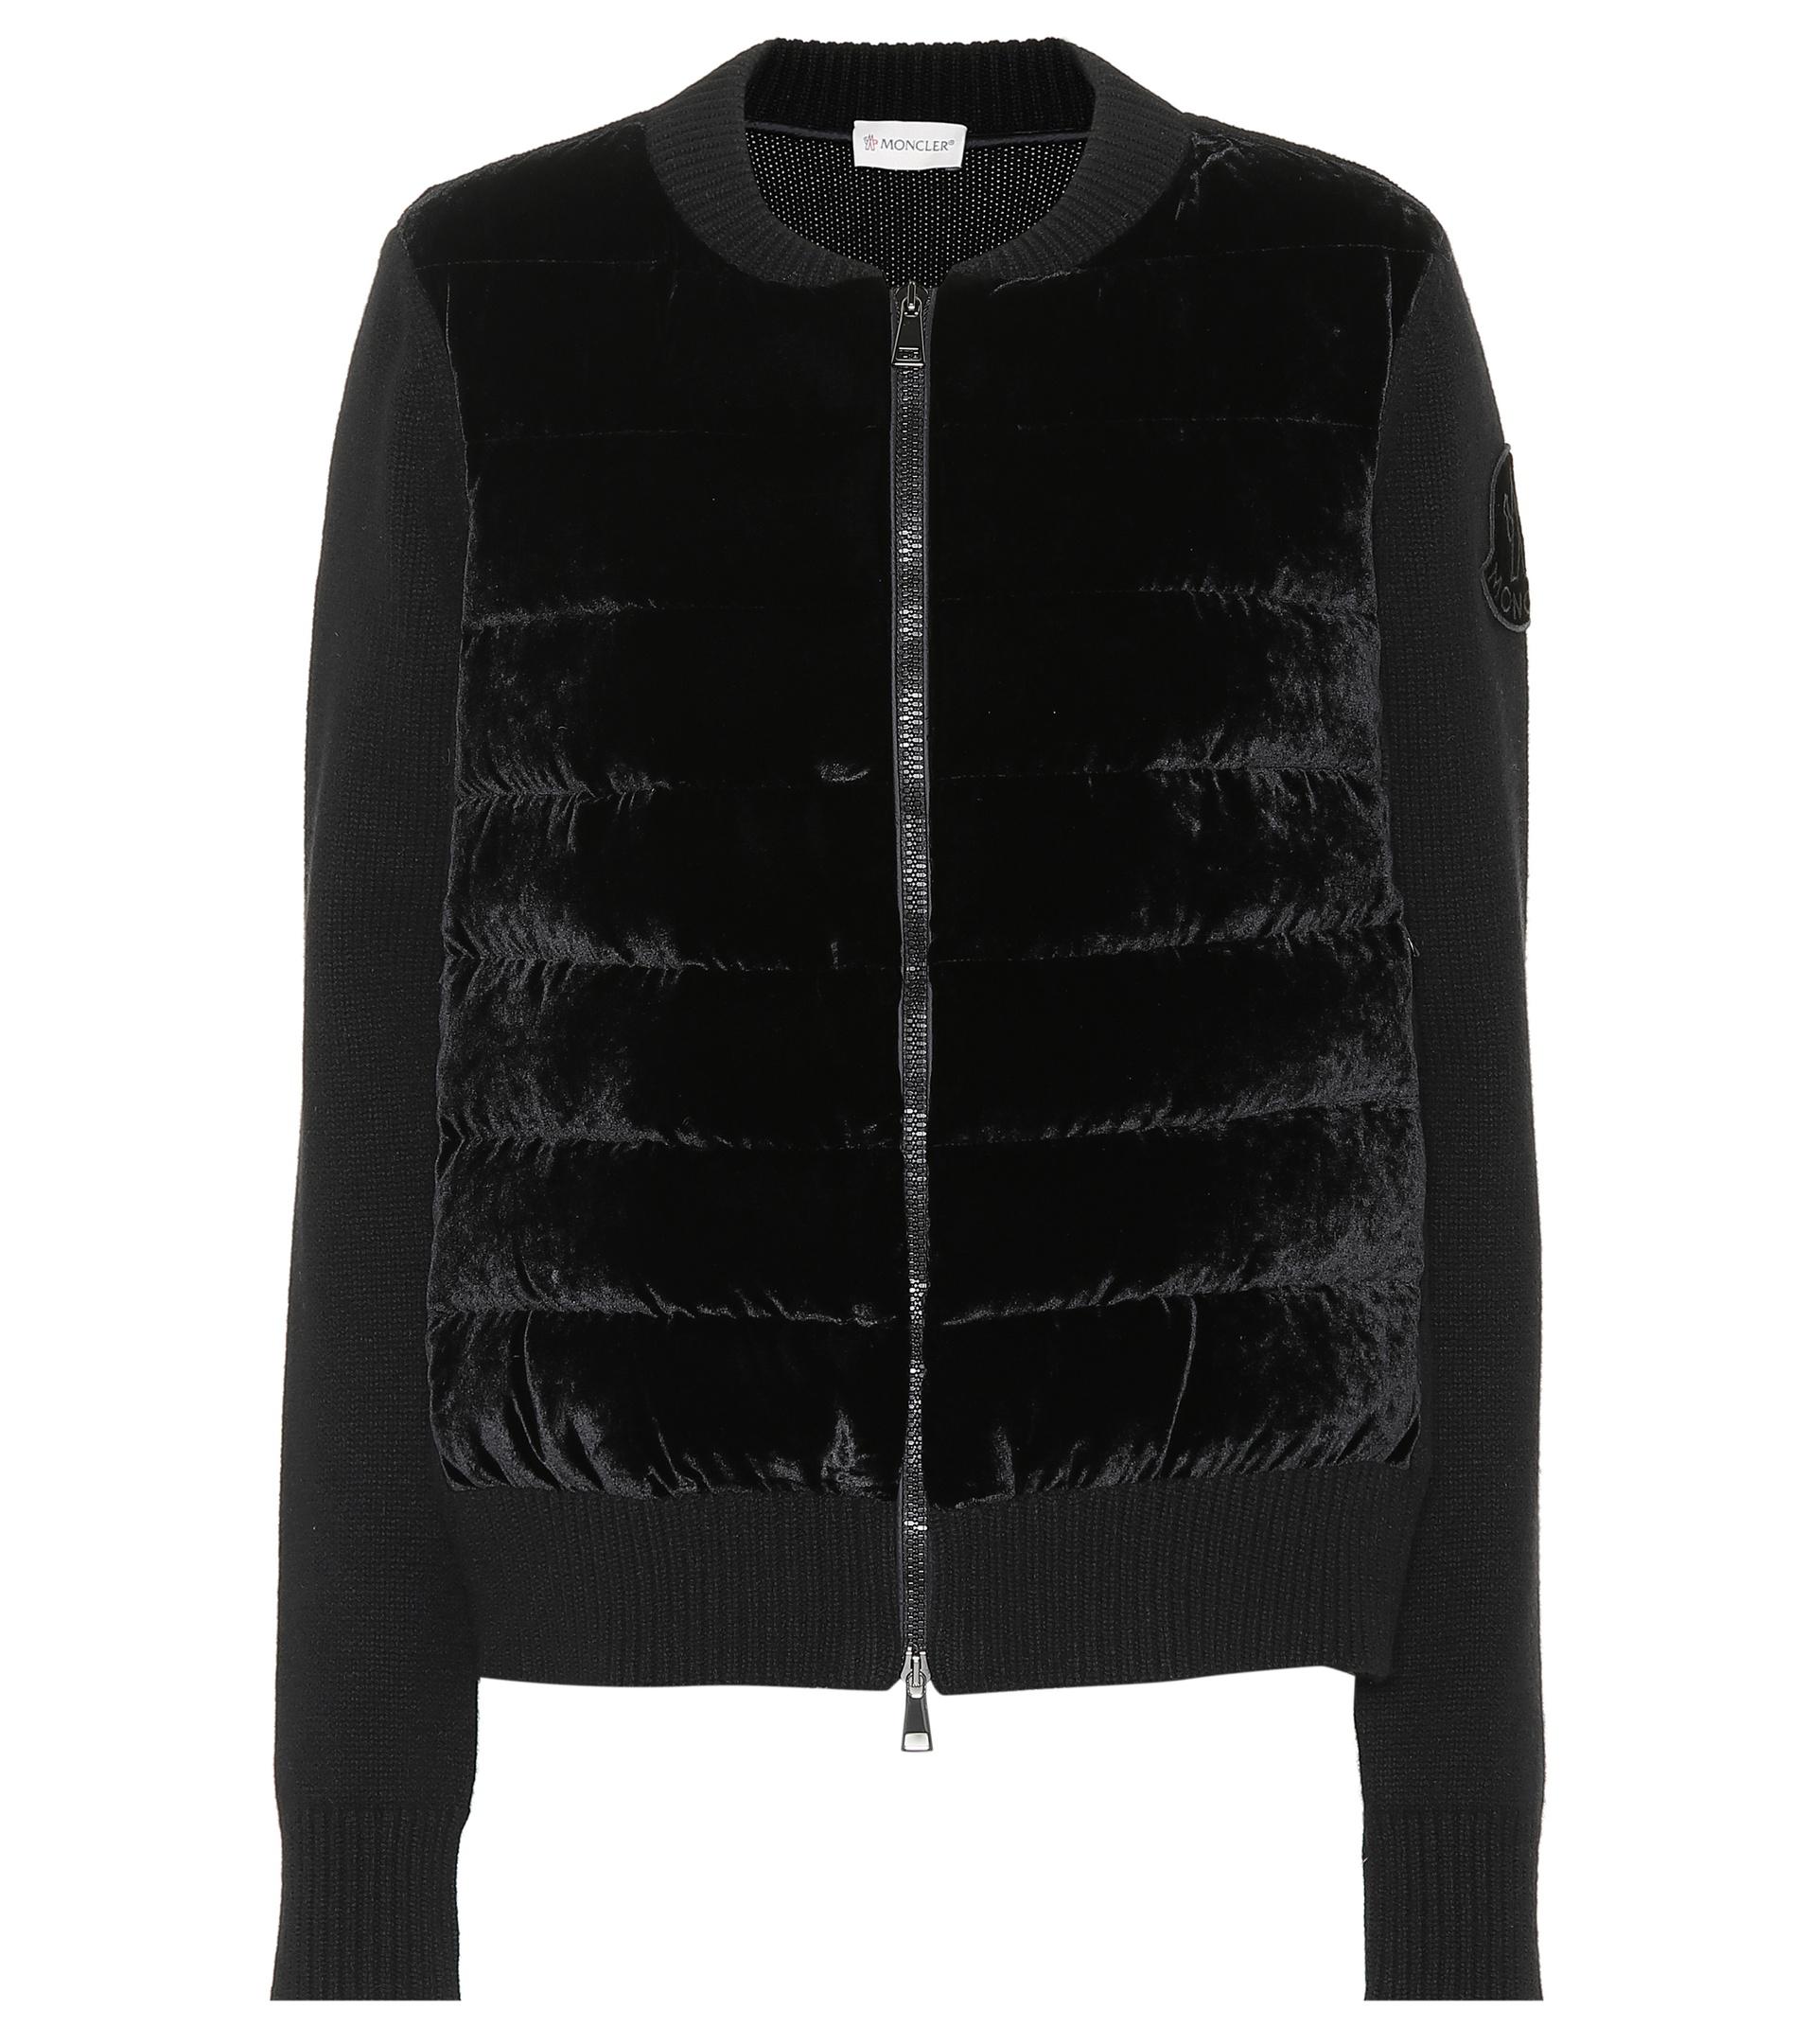 Moncler Wool And Cashmere-blend Jacket in Black - Save 27% - Lyst